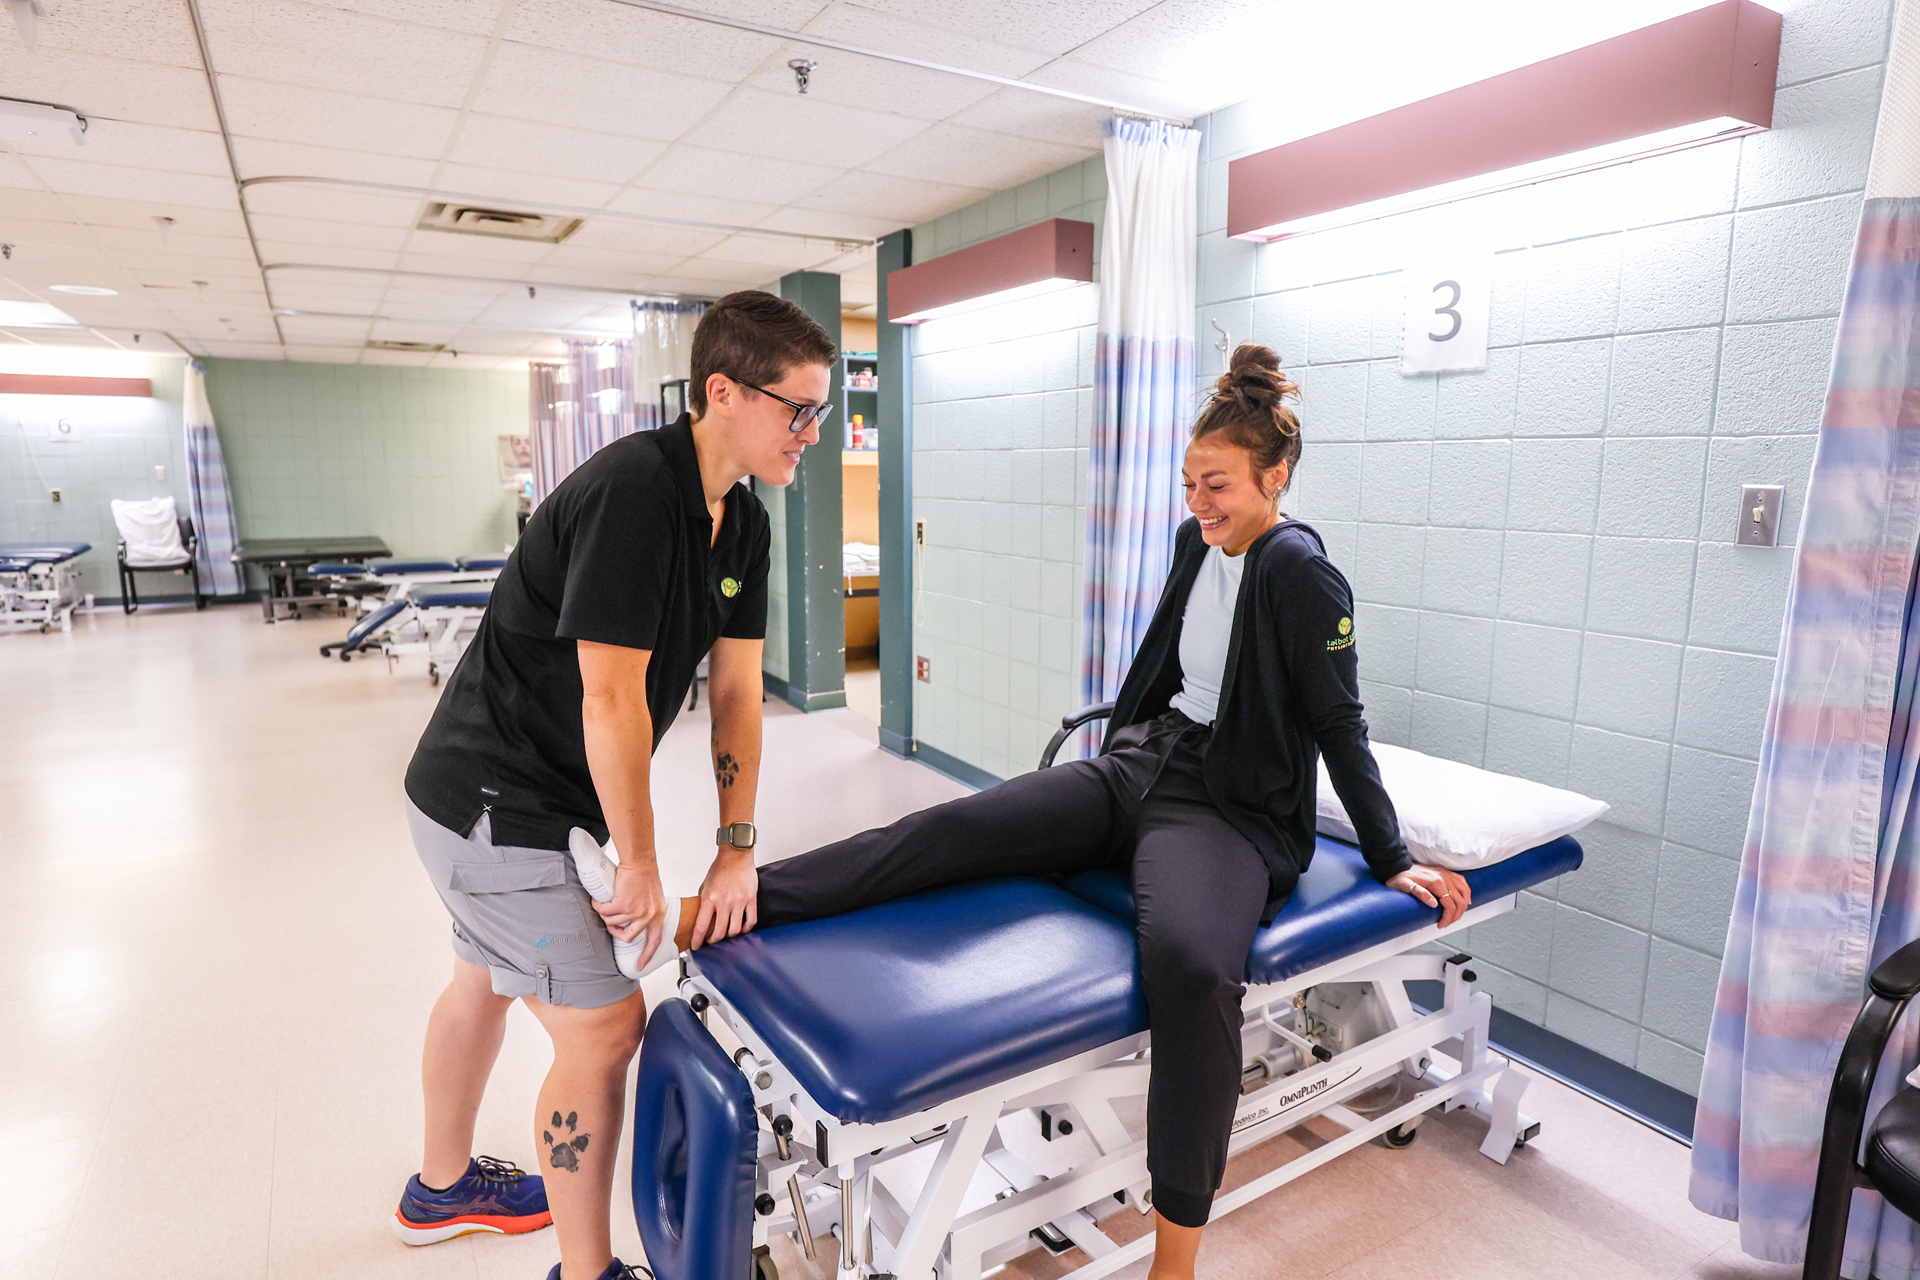 Images showcasing Talbot Trail Physiotherapy's services, including Physiotherapy, Pediatric Care, Hydrotherapy, Acupuncture, Shockwave Therapy, Concussion Treatment, Custom Bracing, Chiropractic, Orthotics, Massage Therapy, Vestibular Rehabilitation, and Pelvic Health.